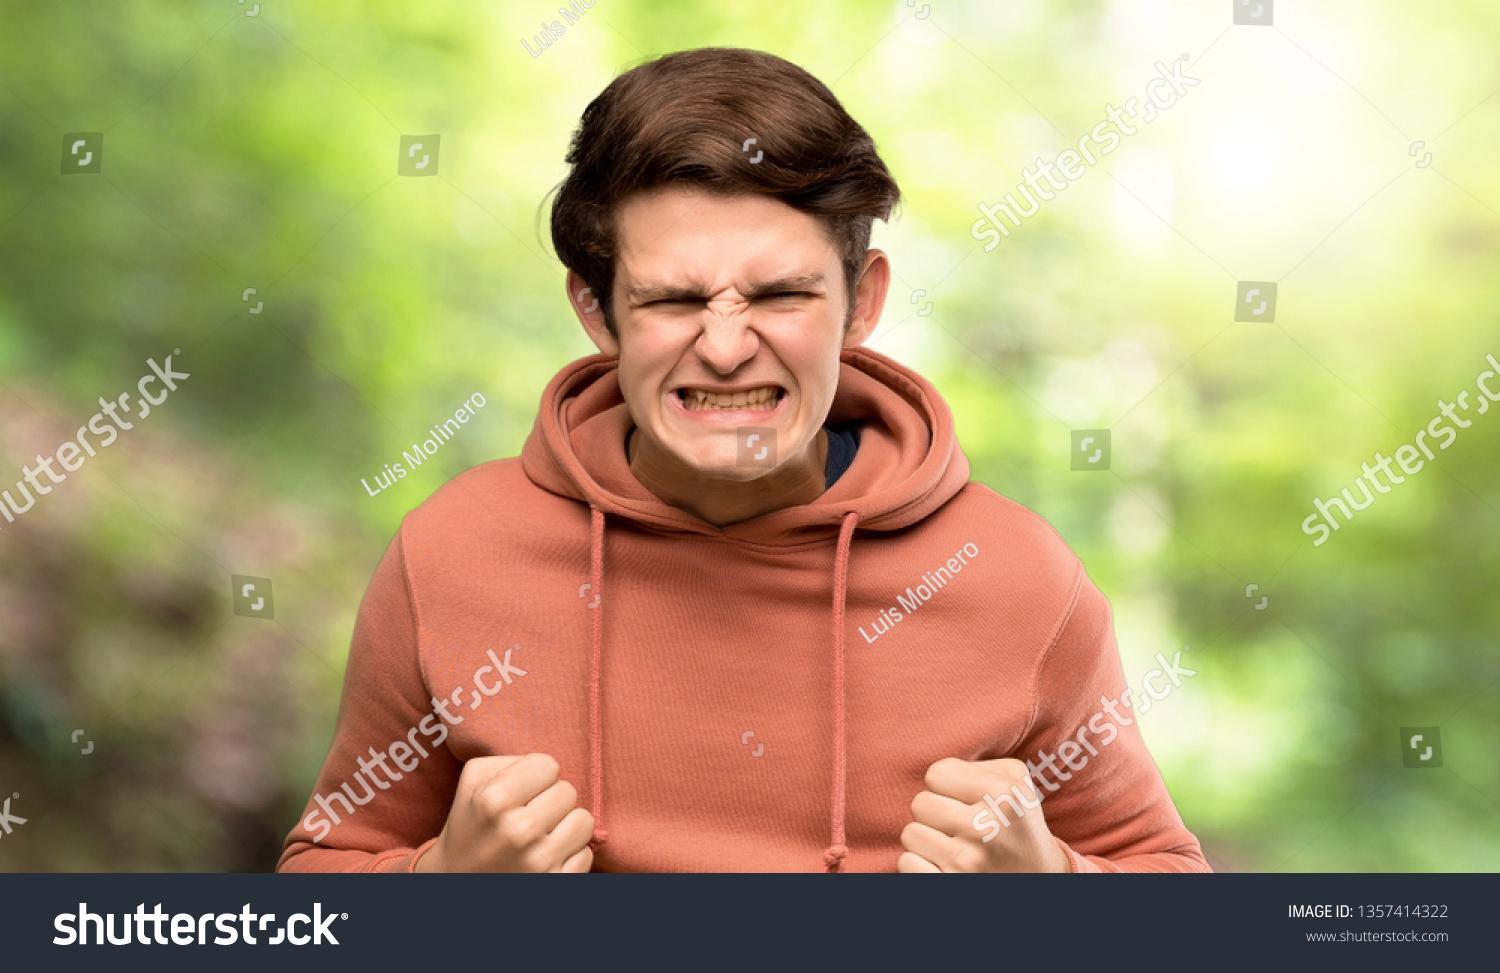 Teenager man with sweatshirt frustrated by a bad situation at outdoors #1357414322